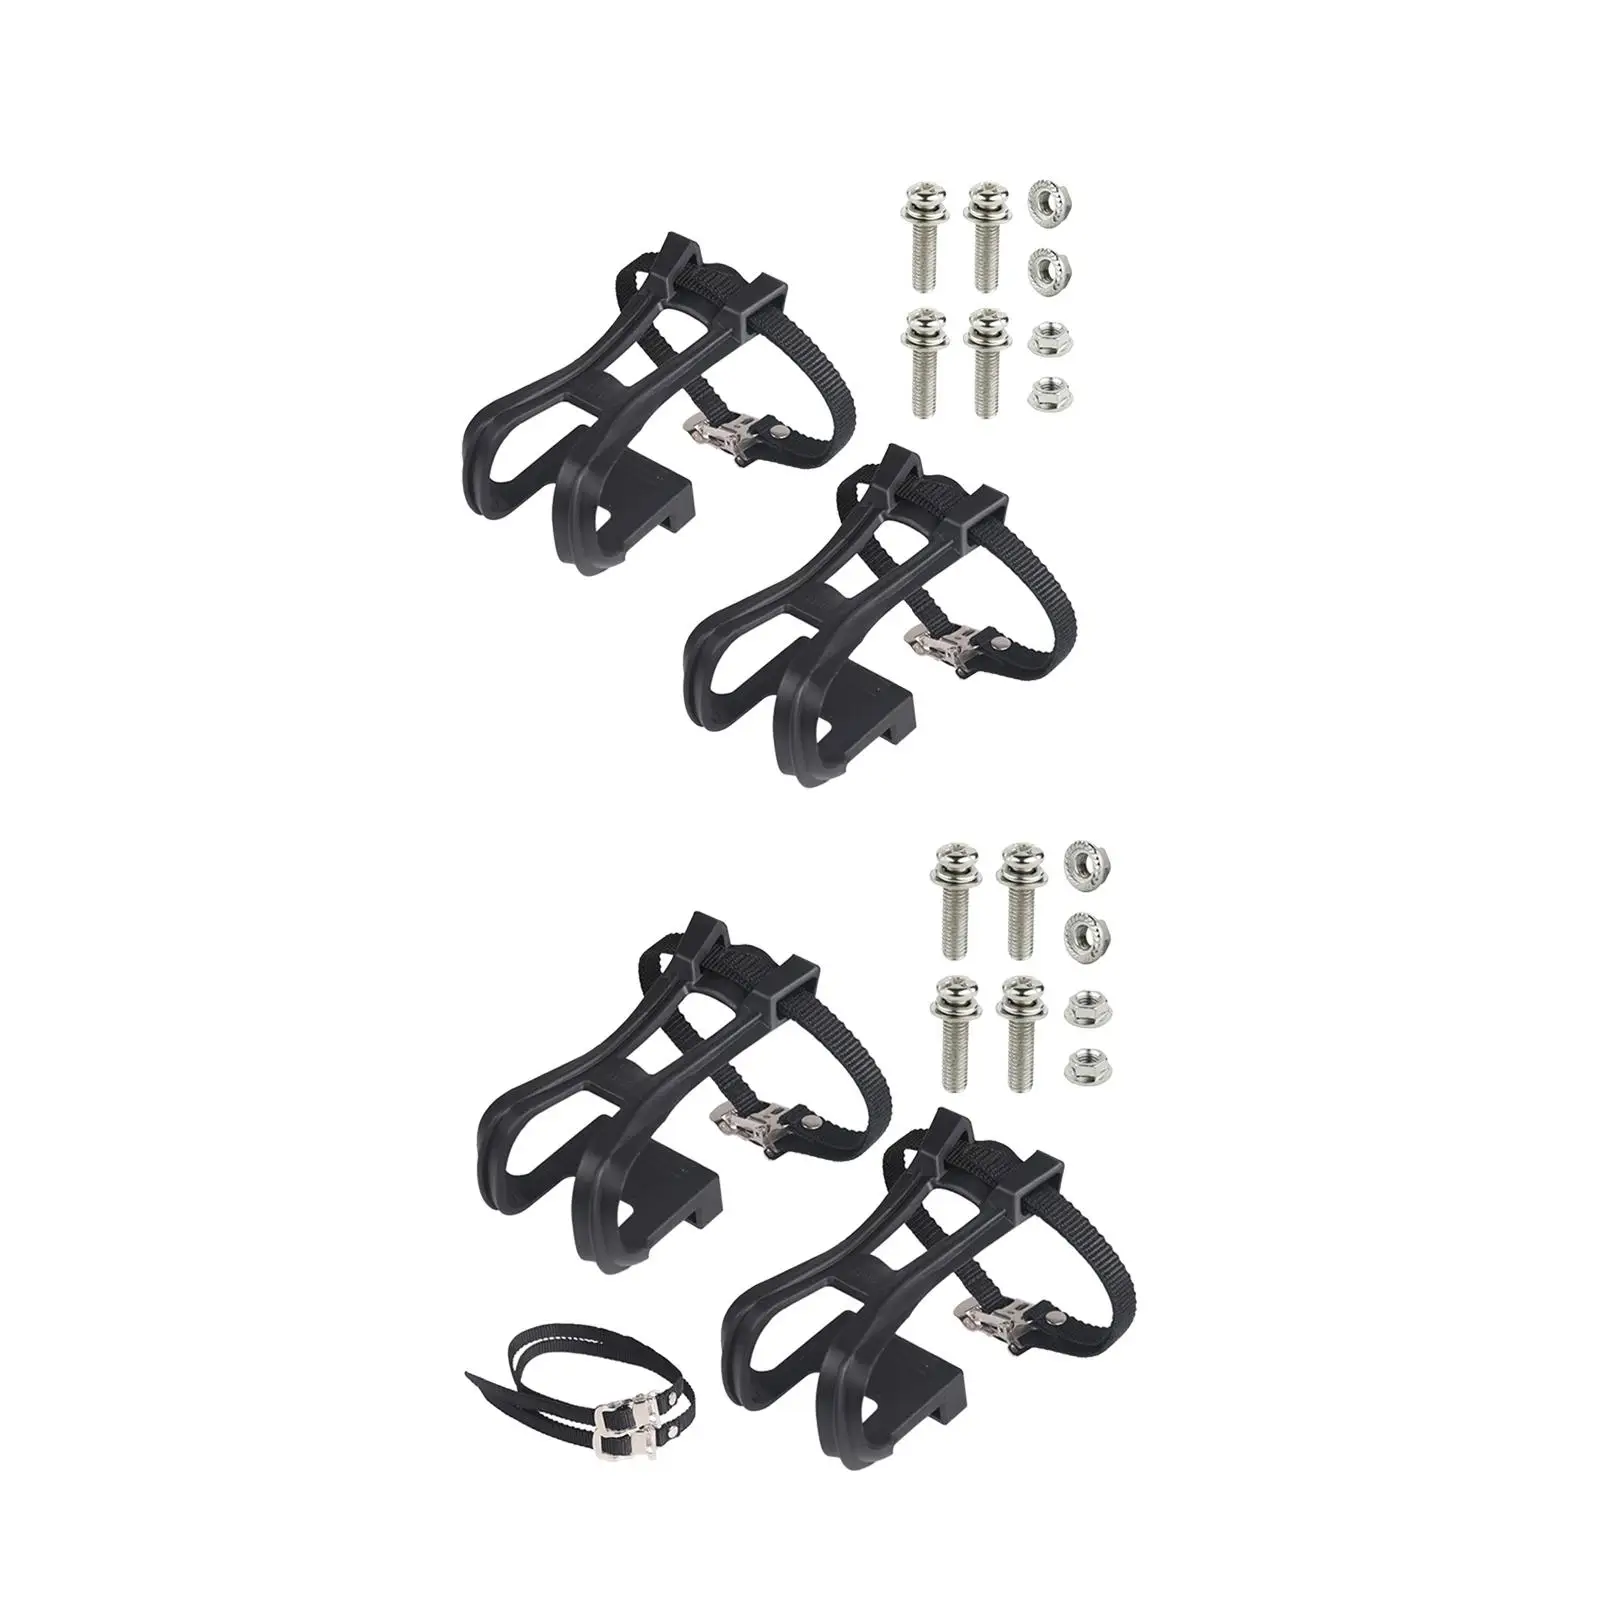 Pedal Clips Straps, Bike Pedal Straps, Bicycle Feet Strap for Stationary